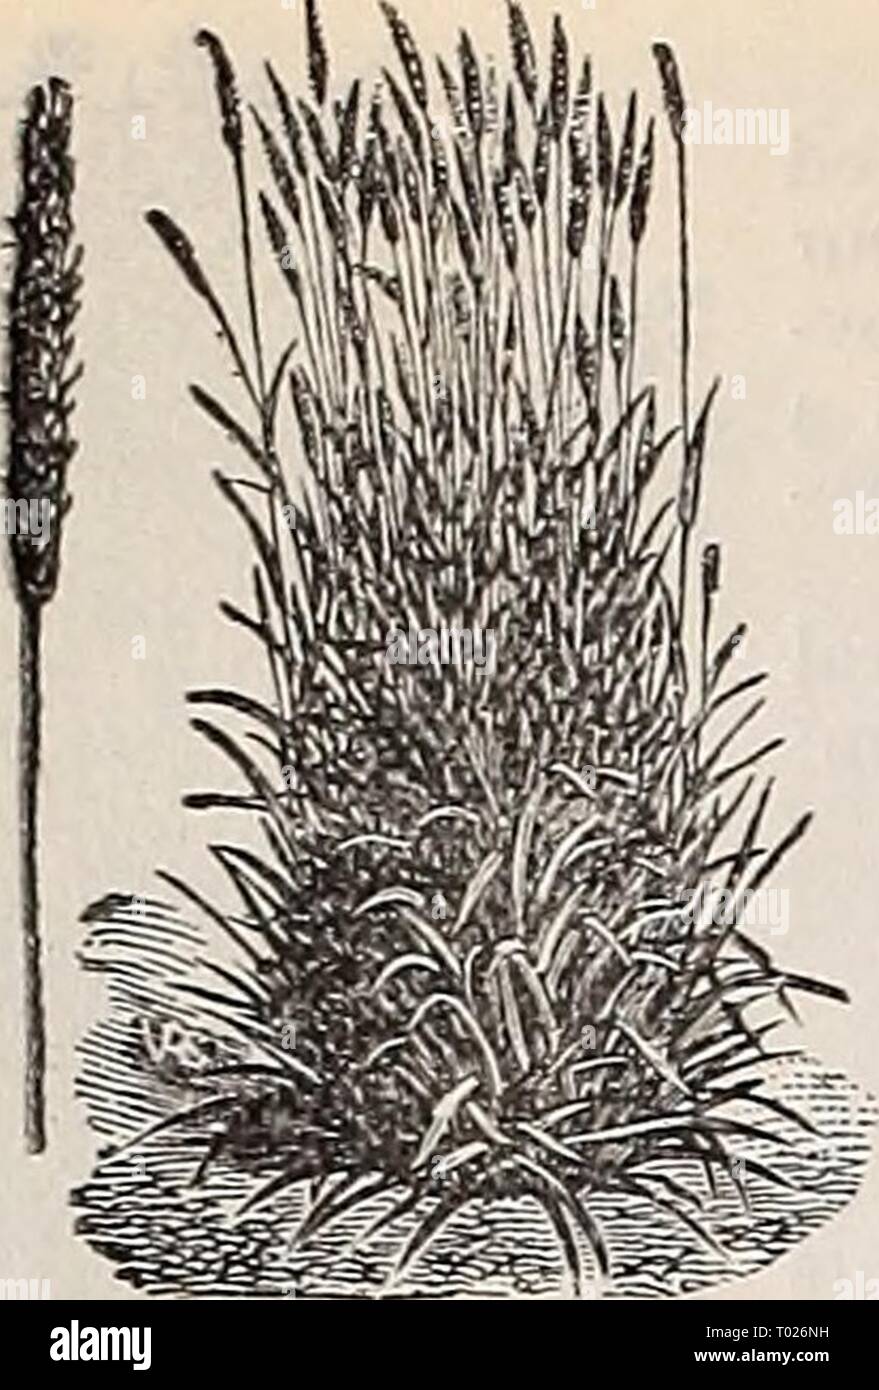 Dreer's garden calendar : 1897 . dreersgardencale1897henr Year: 1897  54 GRASS AND CLOVER SEEDS.    Foxtail Grass. Sheep's Fescue [Festuca ovina). This grass forms a large part of the pasturage of the Eng- lish Downs. It produces a large quantity of short herbage, and should form a part of all mixtures for sheep pastures. 40 lbs. to the acre. Lb. 20 cts.; 100 lbs. S16.00. Fall Meadow Oat Grass (Avena elatior). A valuable grass for soiling or permanent pas- ture ; of early and luxuriant growth. 50 lbs. to the acre. Lb. 20 cts ; 100 lbs. 618.00. Timothy (Phleumprotease). The most important agric Stock Photo